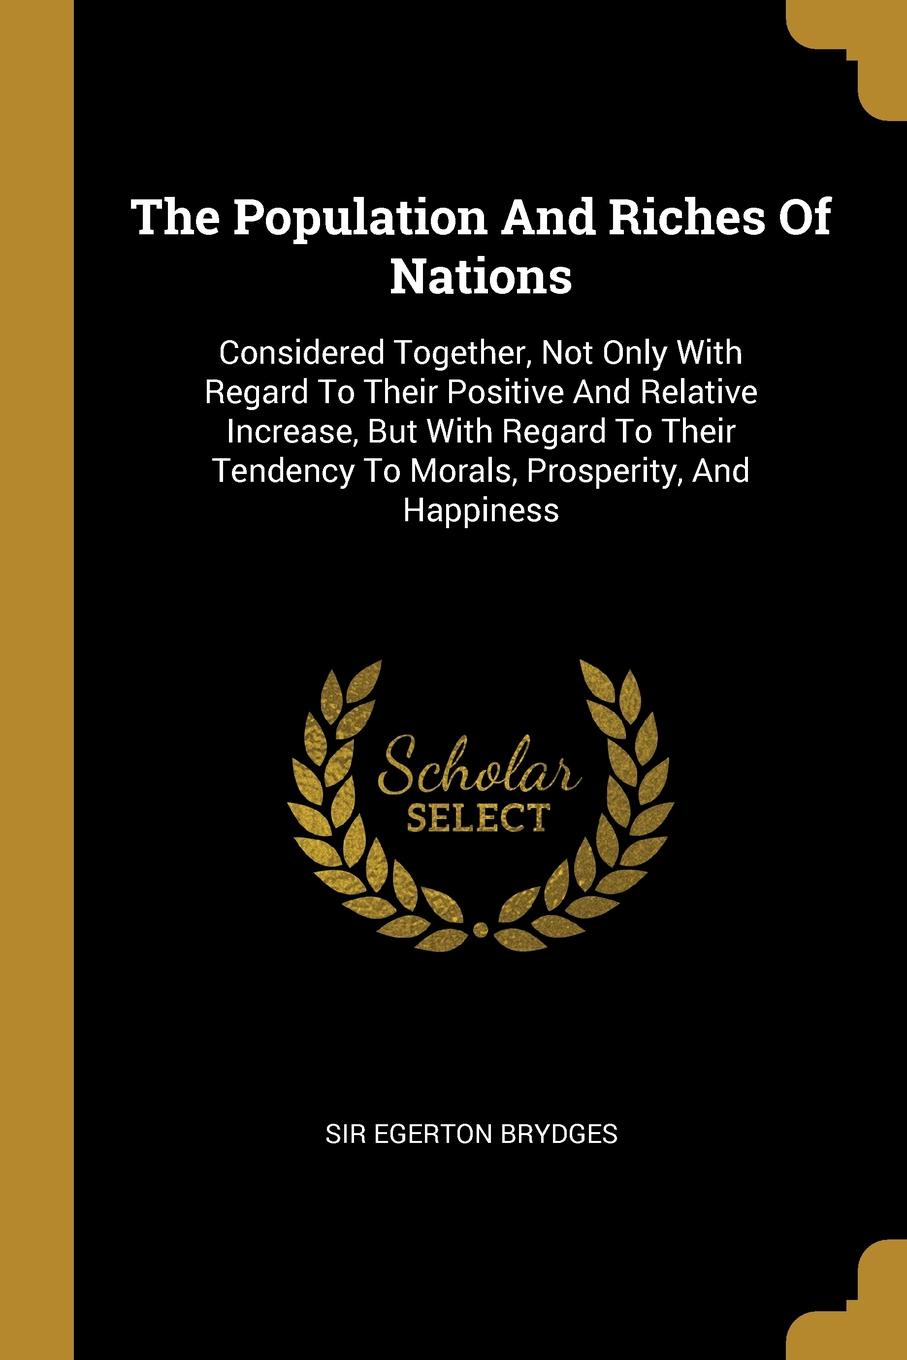 The Population And Riches Of Nations. Considered Together, Not Only With Regard To Their Positive And Relative Increase, But With Regard To Their Tendency To Morals, Prosperity, And Happiness